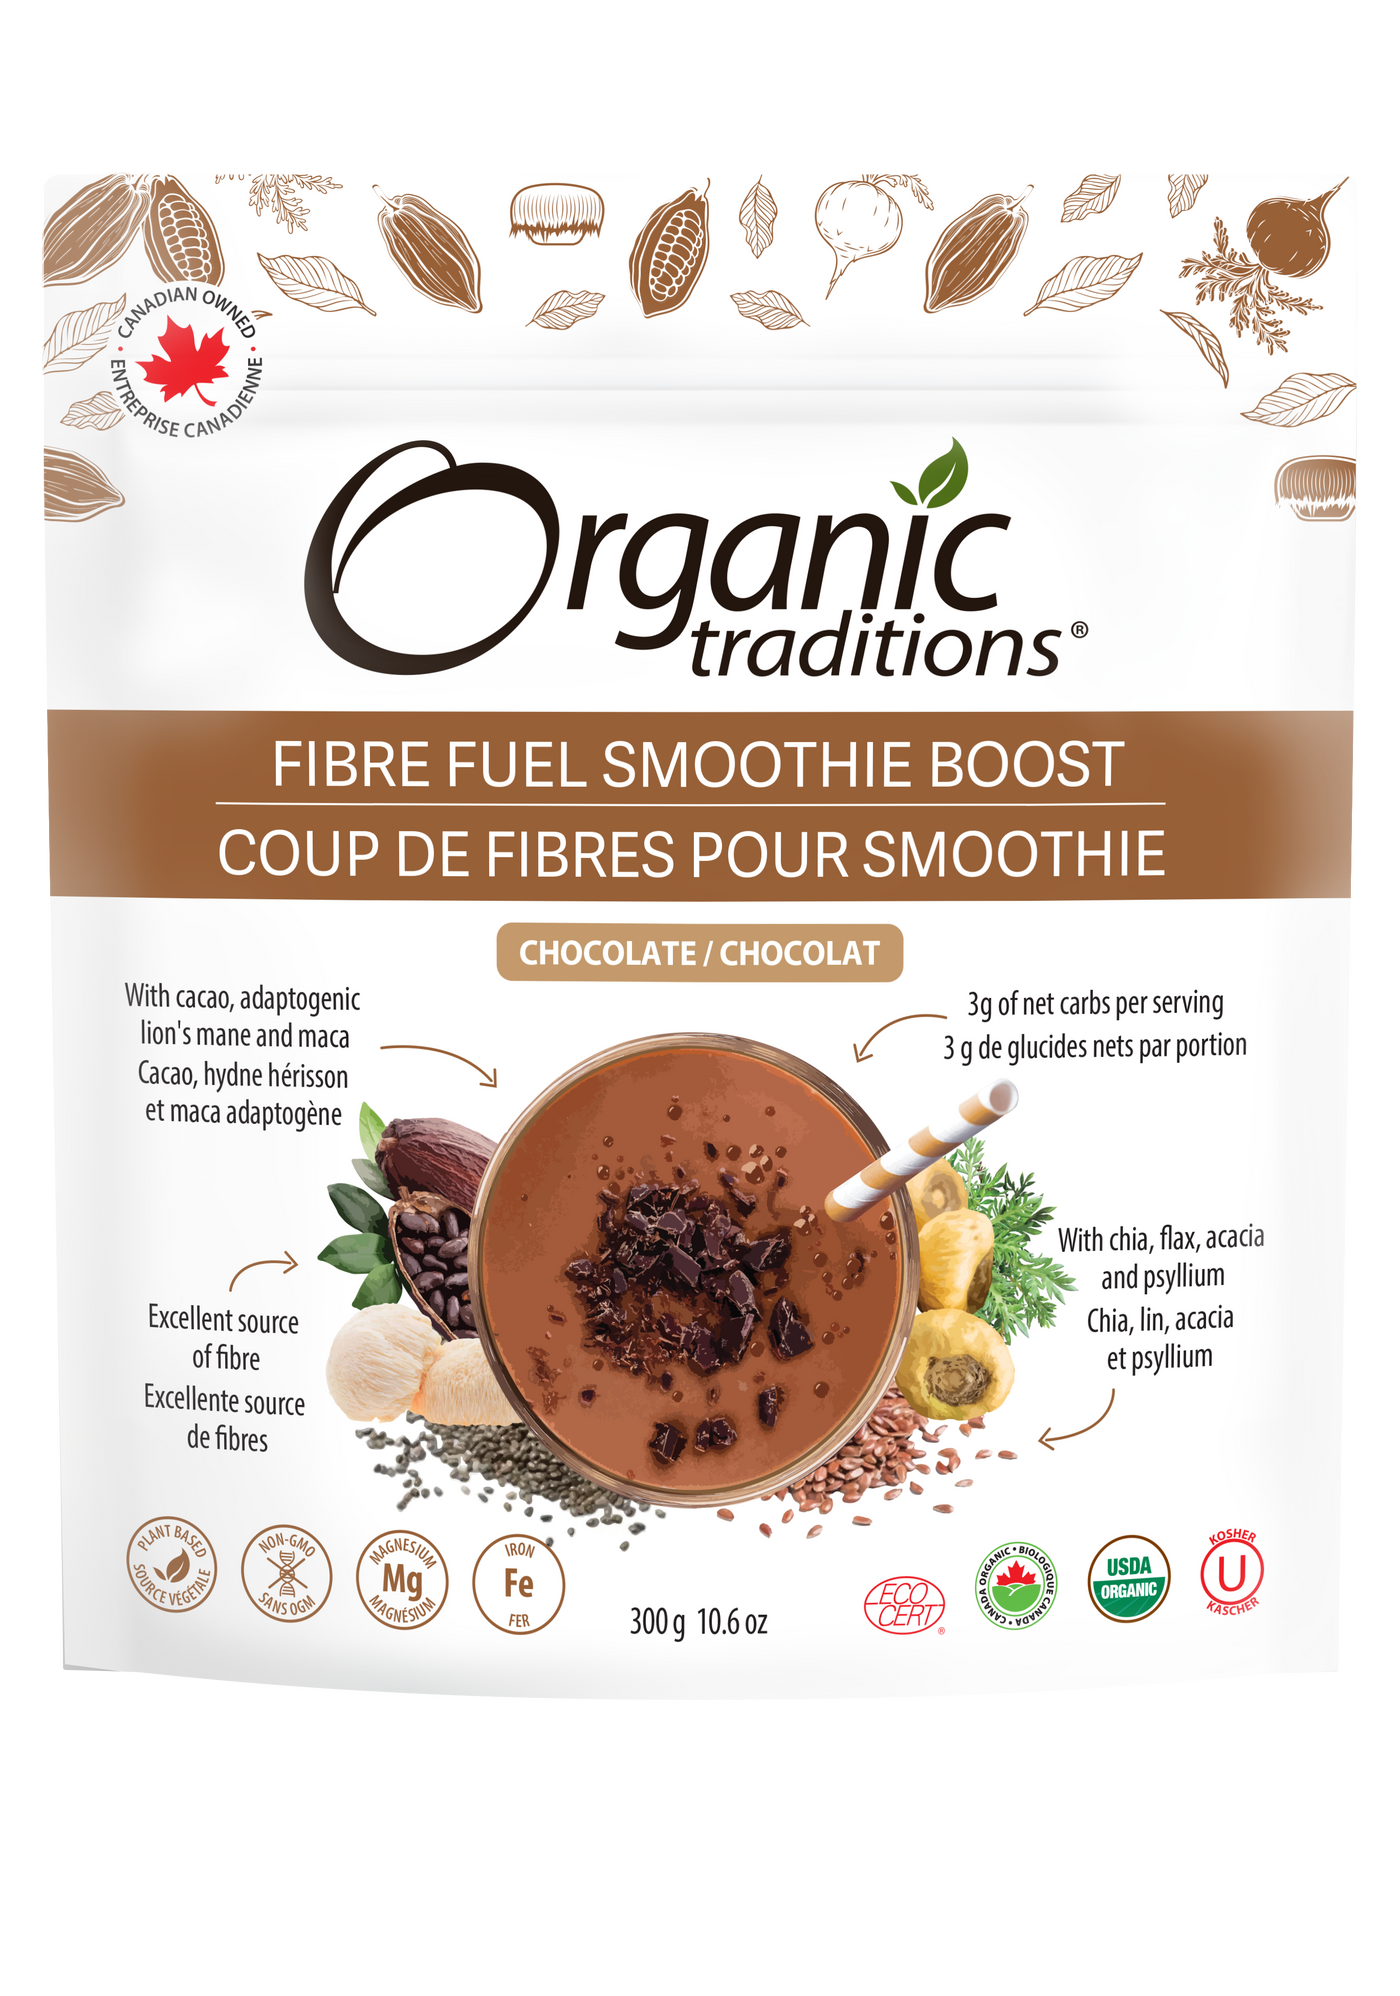 Organic Traditions Fibre Fuel Smoothie Boost Chocolate300g